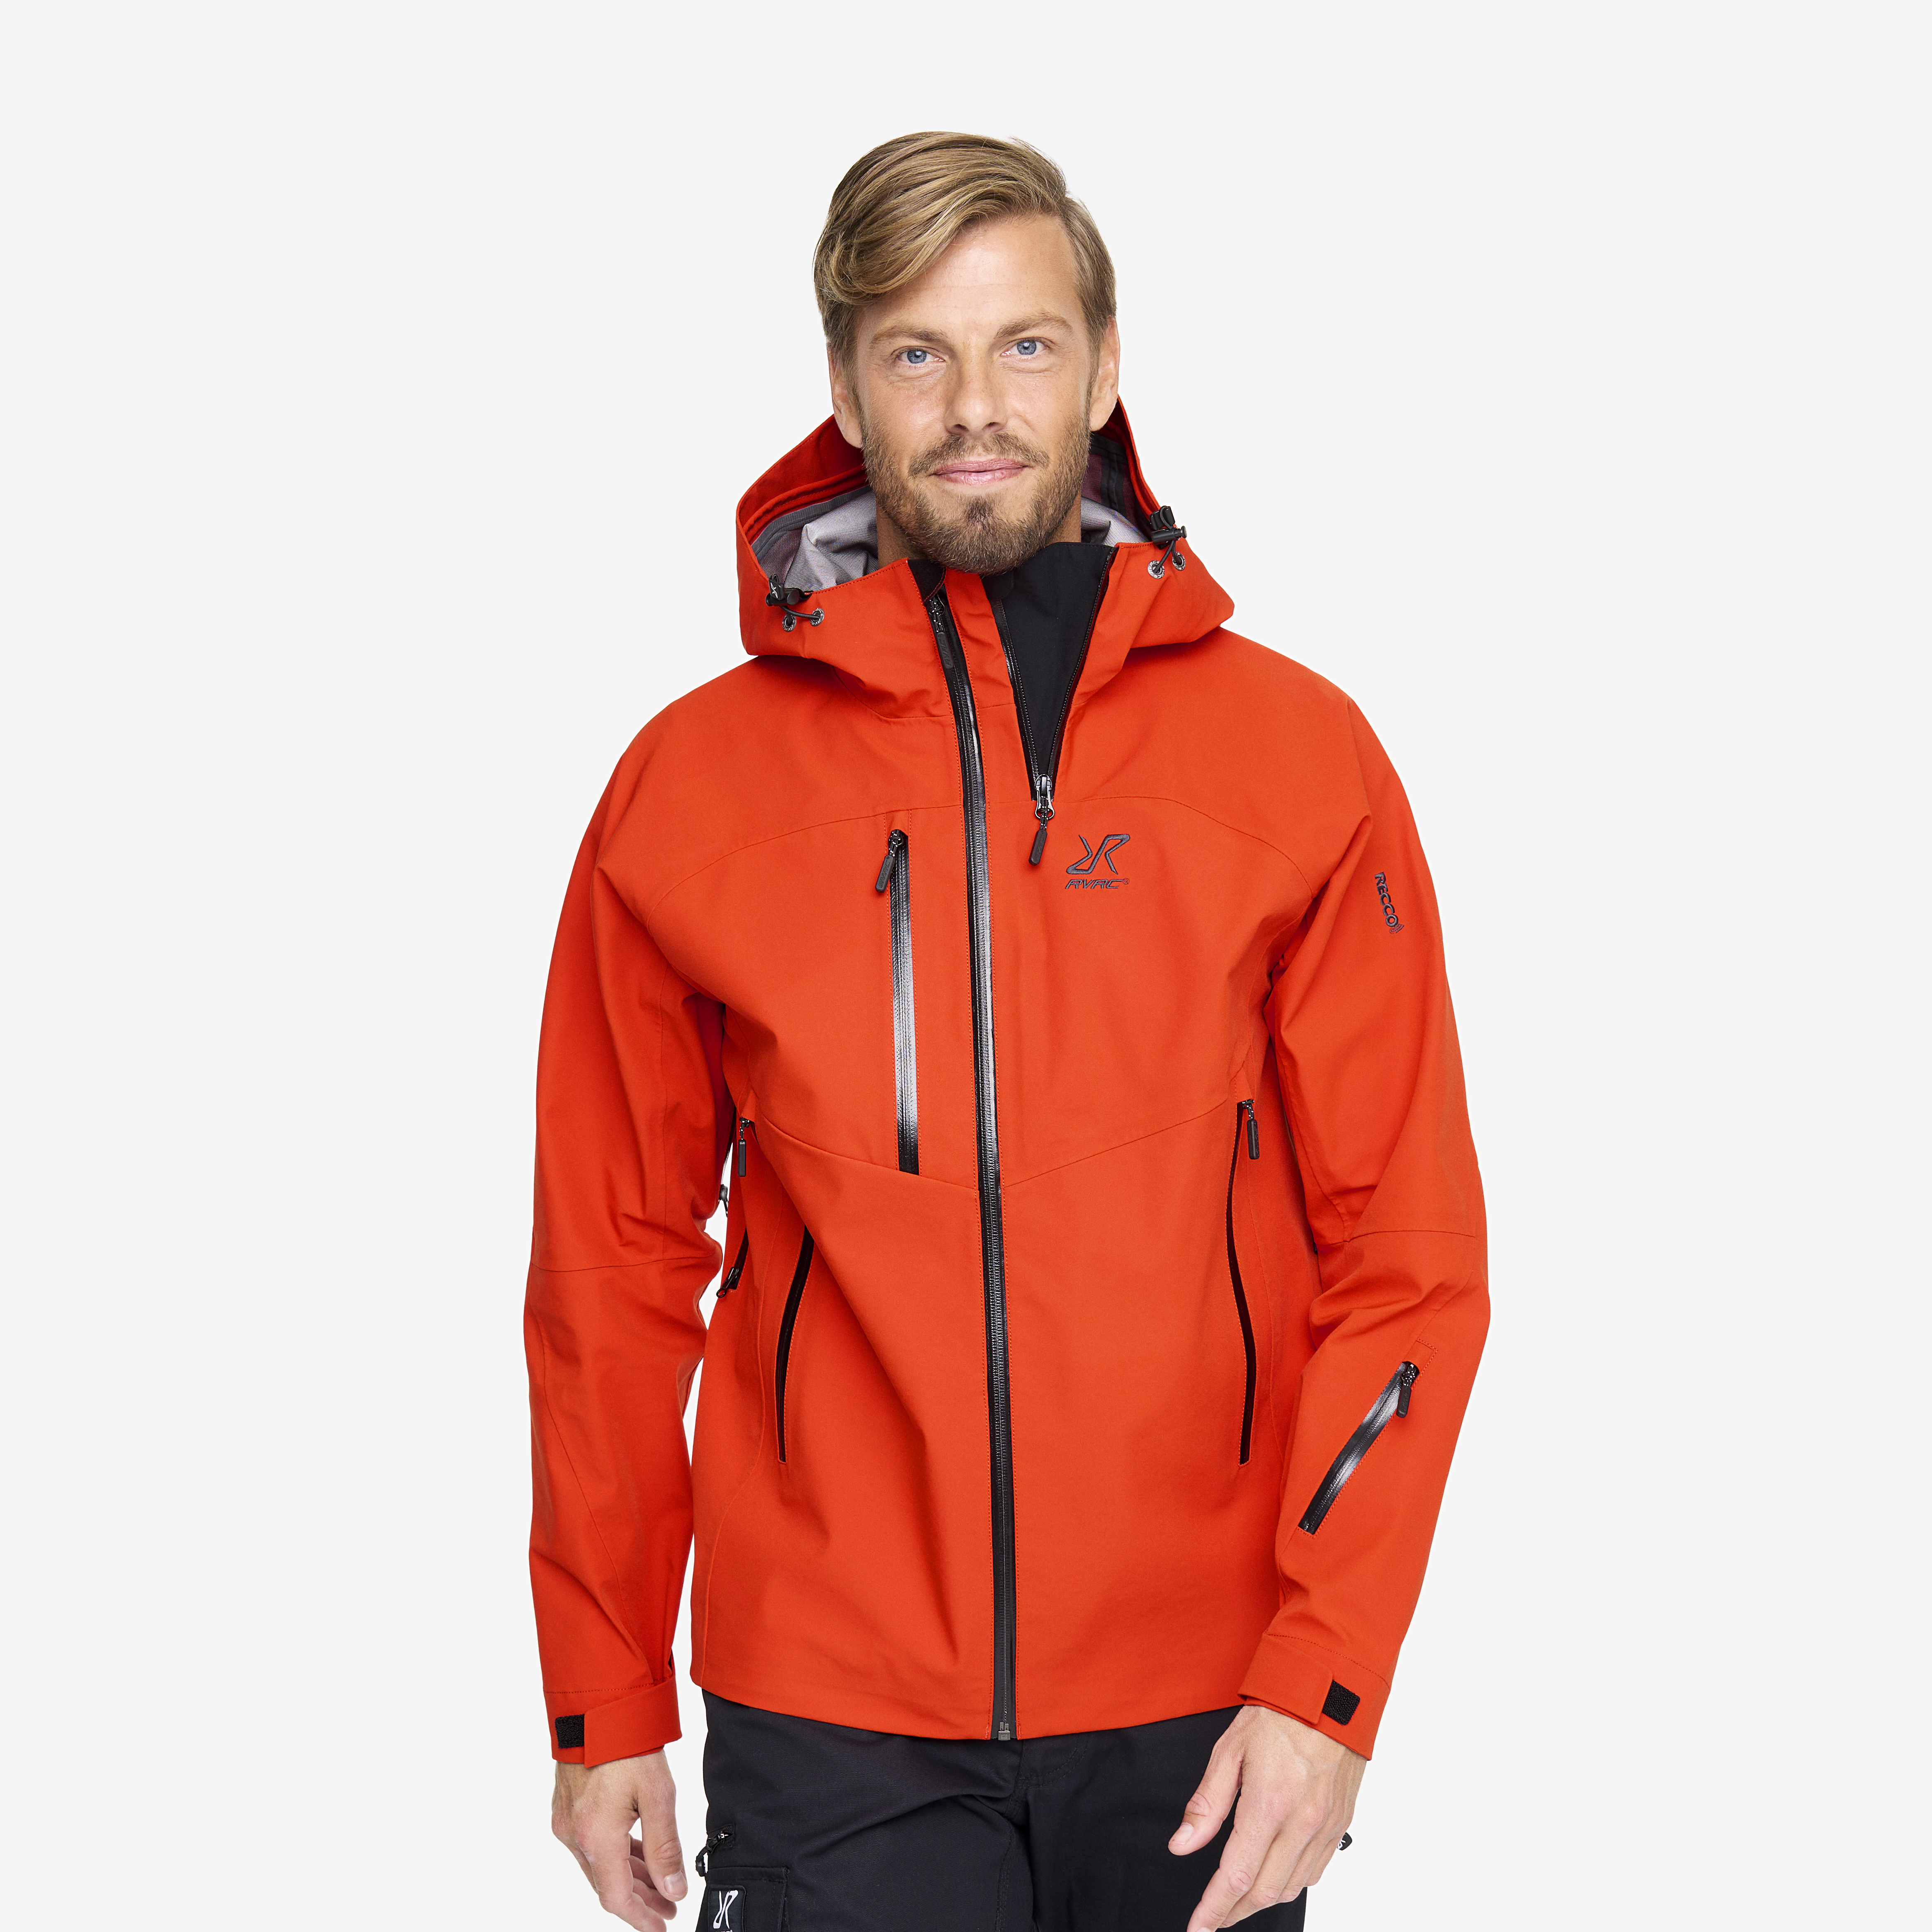 Cyclone Rescue Jacket 2.0 Pureed Pumpkin Homme